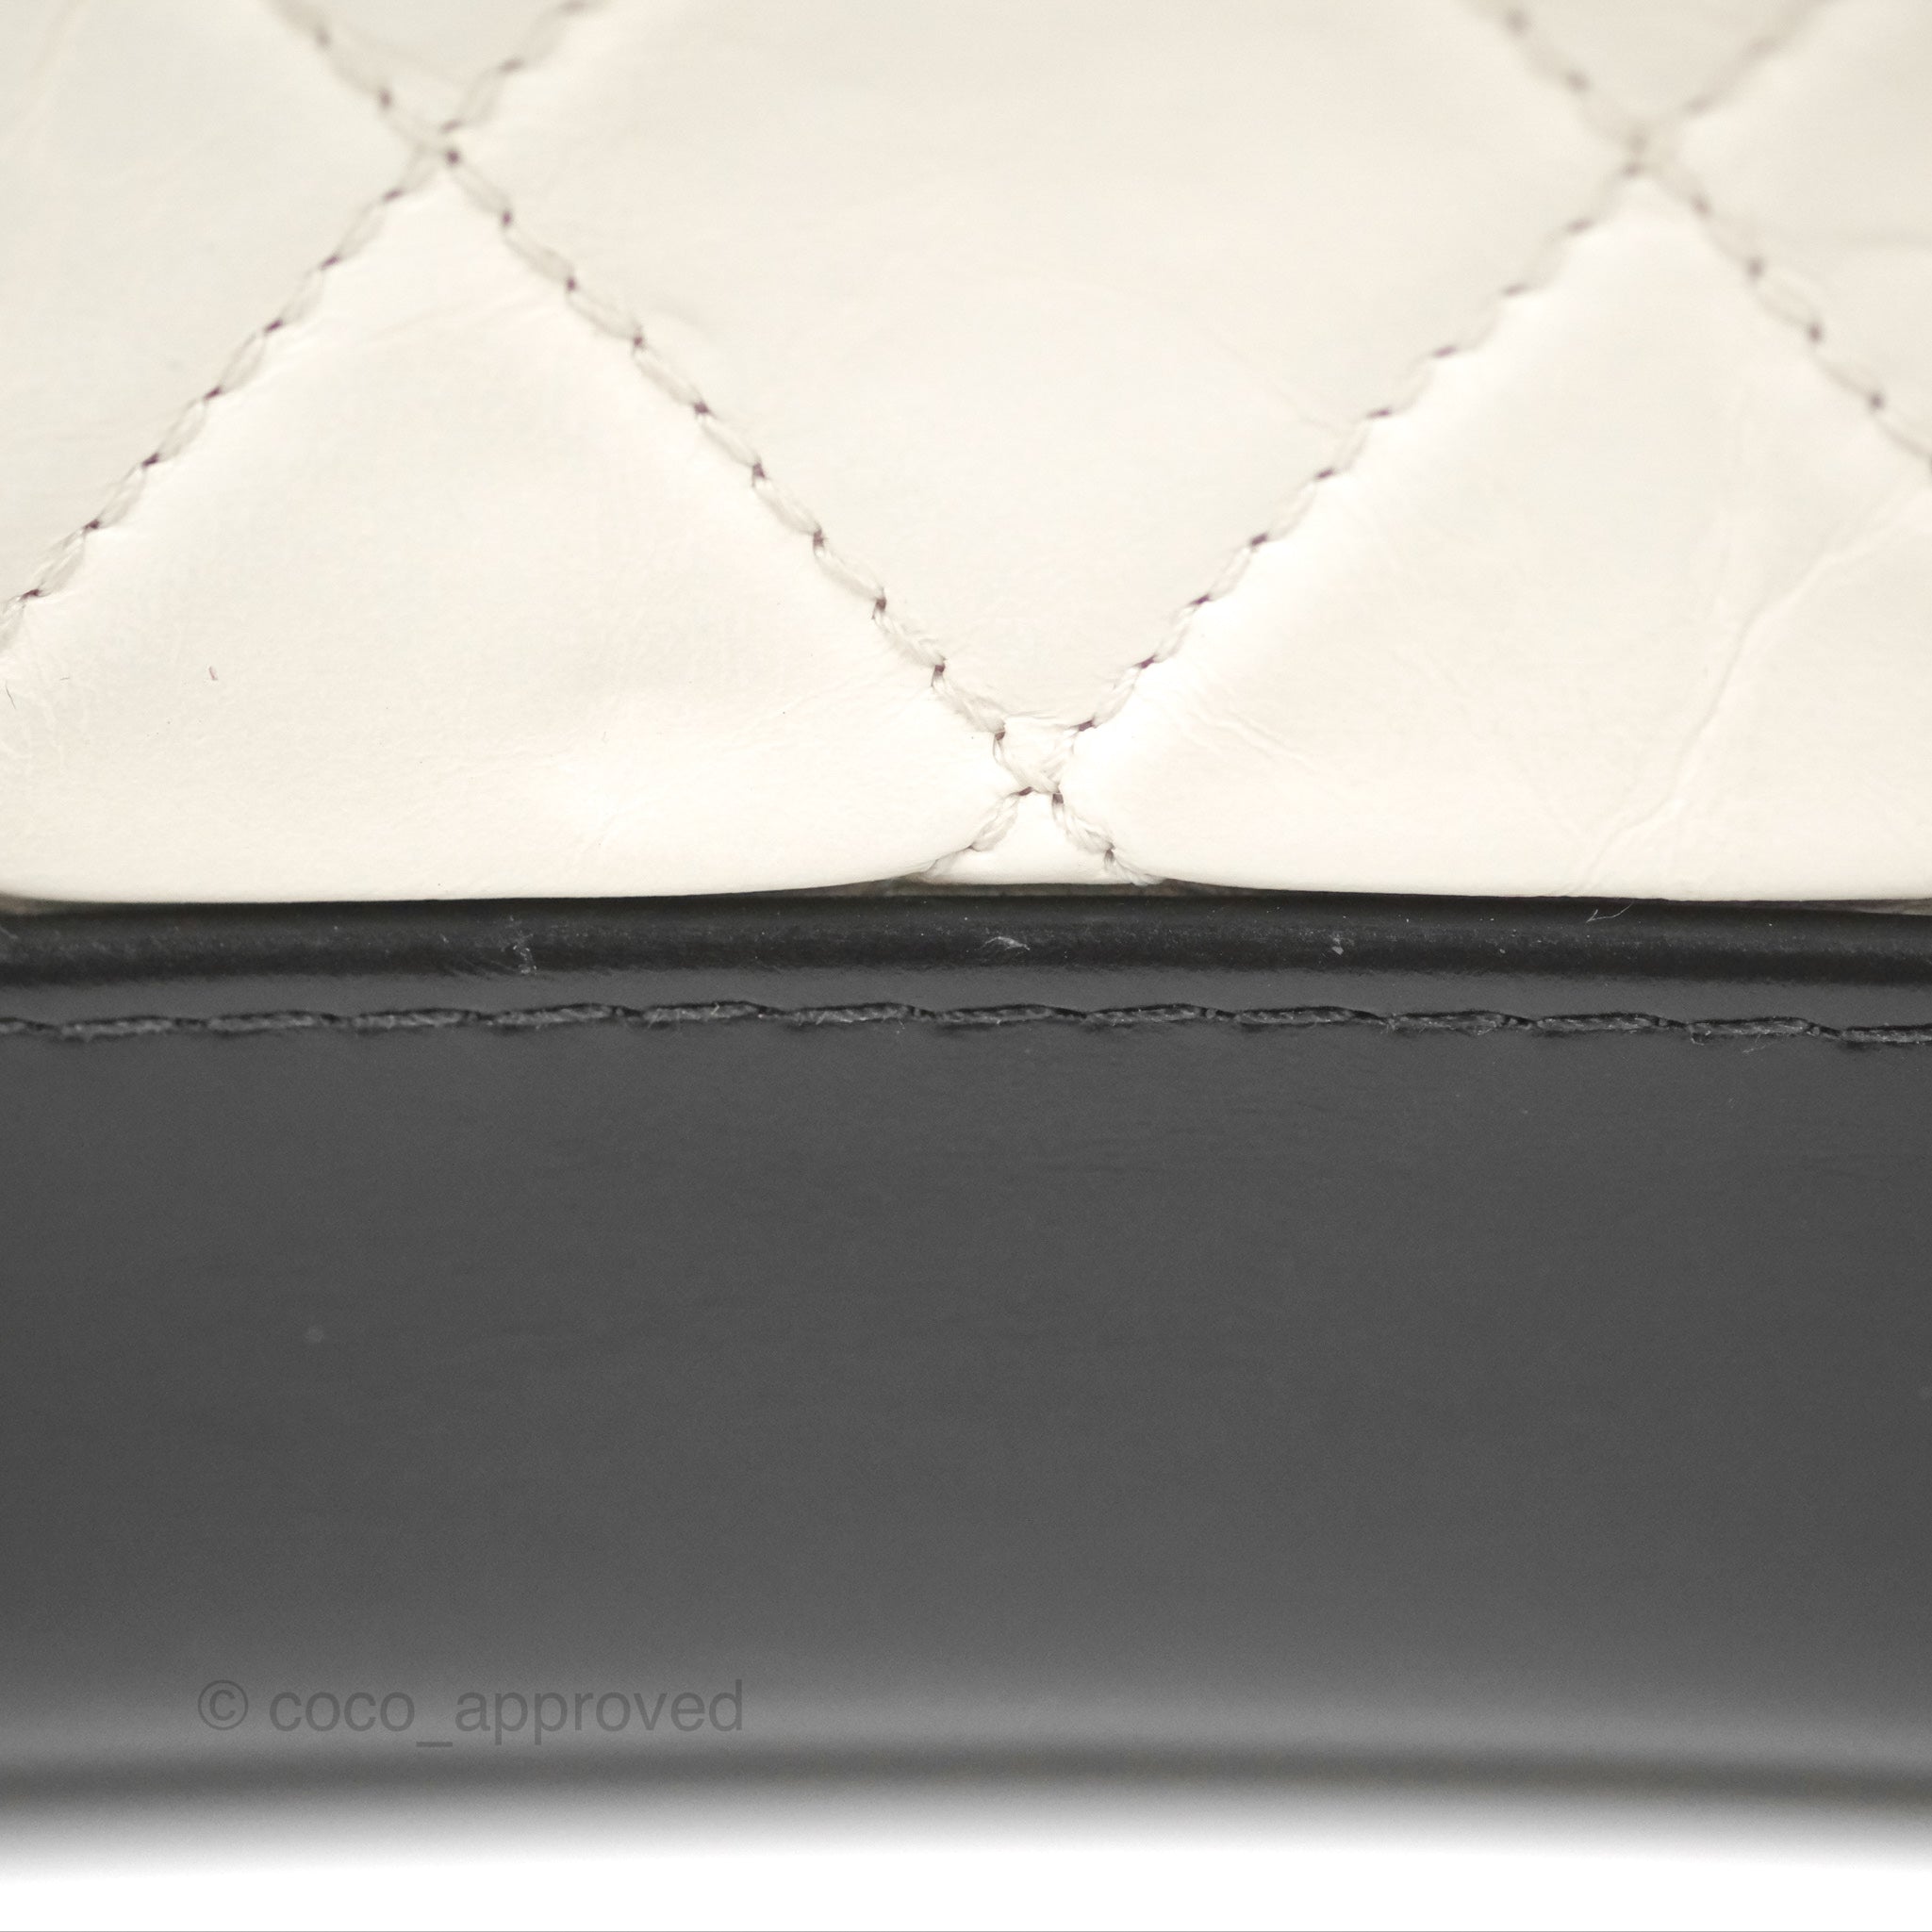 CHANEL Aged Calfskin Quilted Small Gabrielle Hobo Black White 1269968